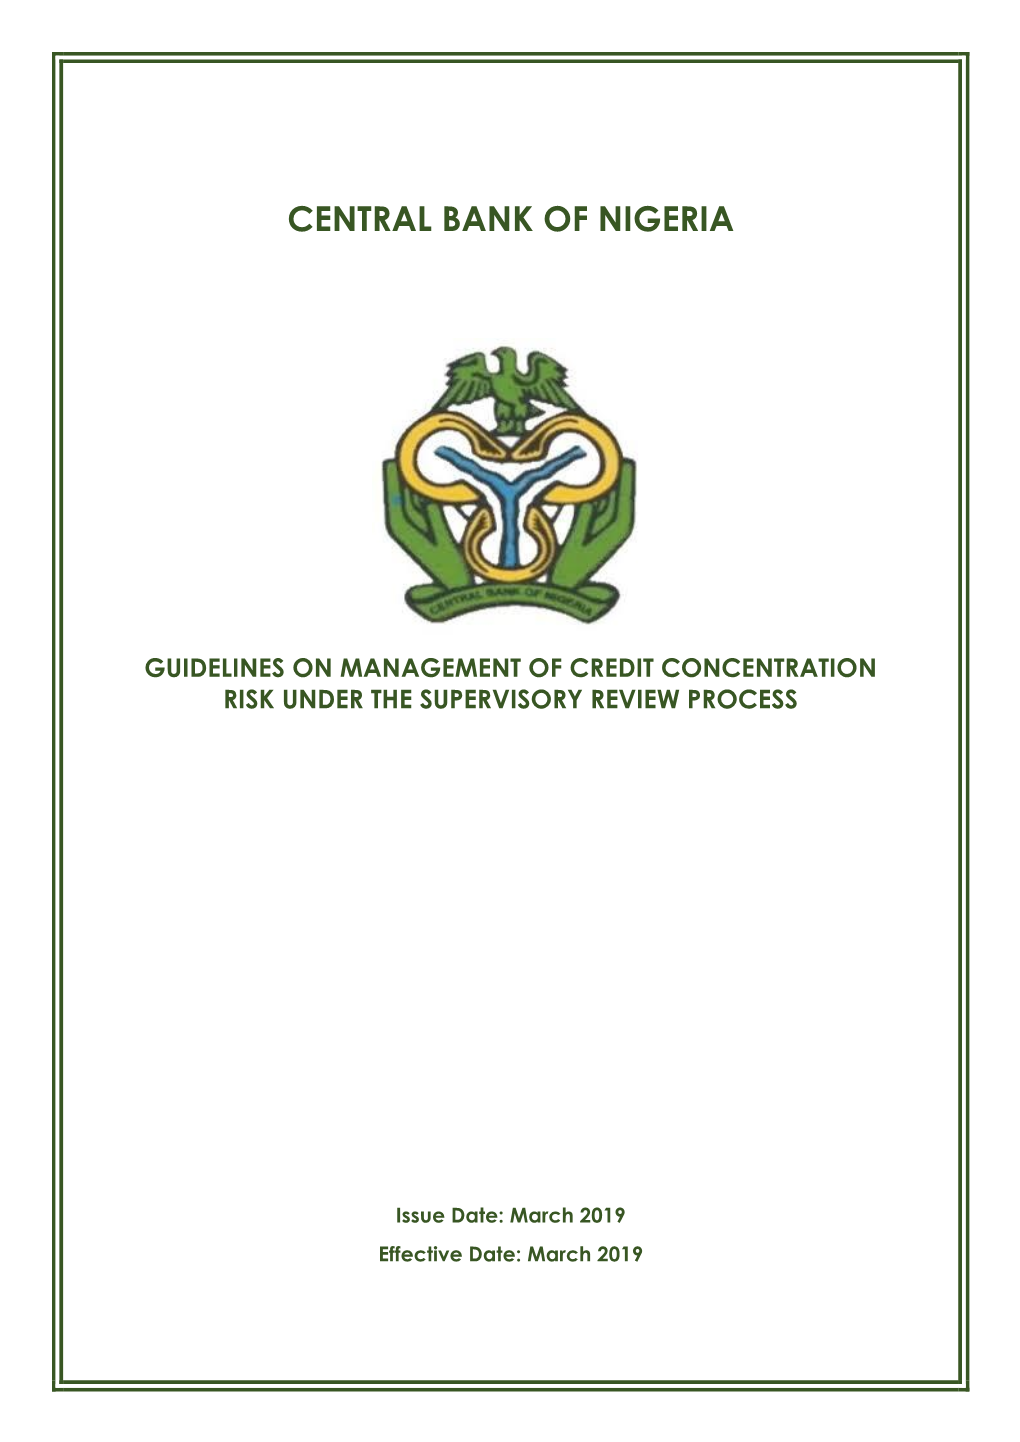 Guidelines on Management of Credit Concentration Risk Under the Supervisory Review Process